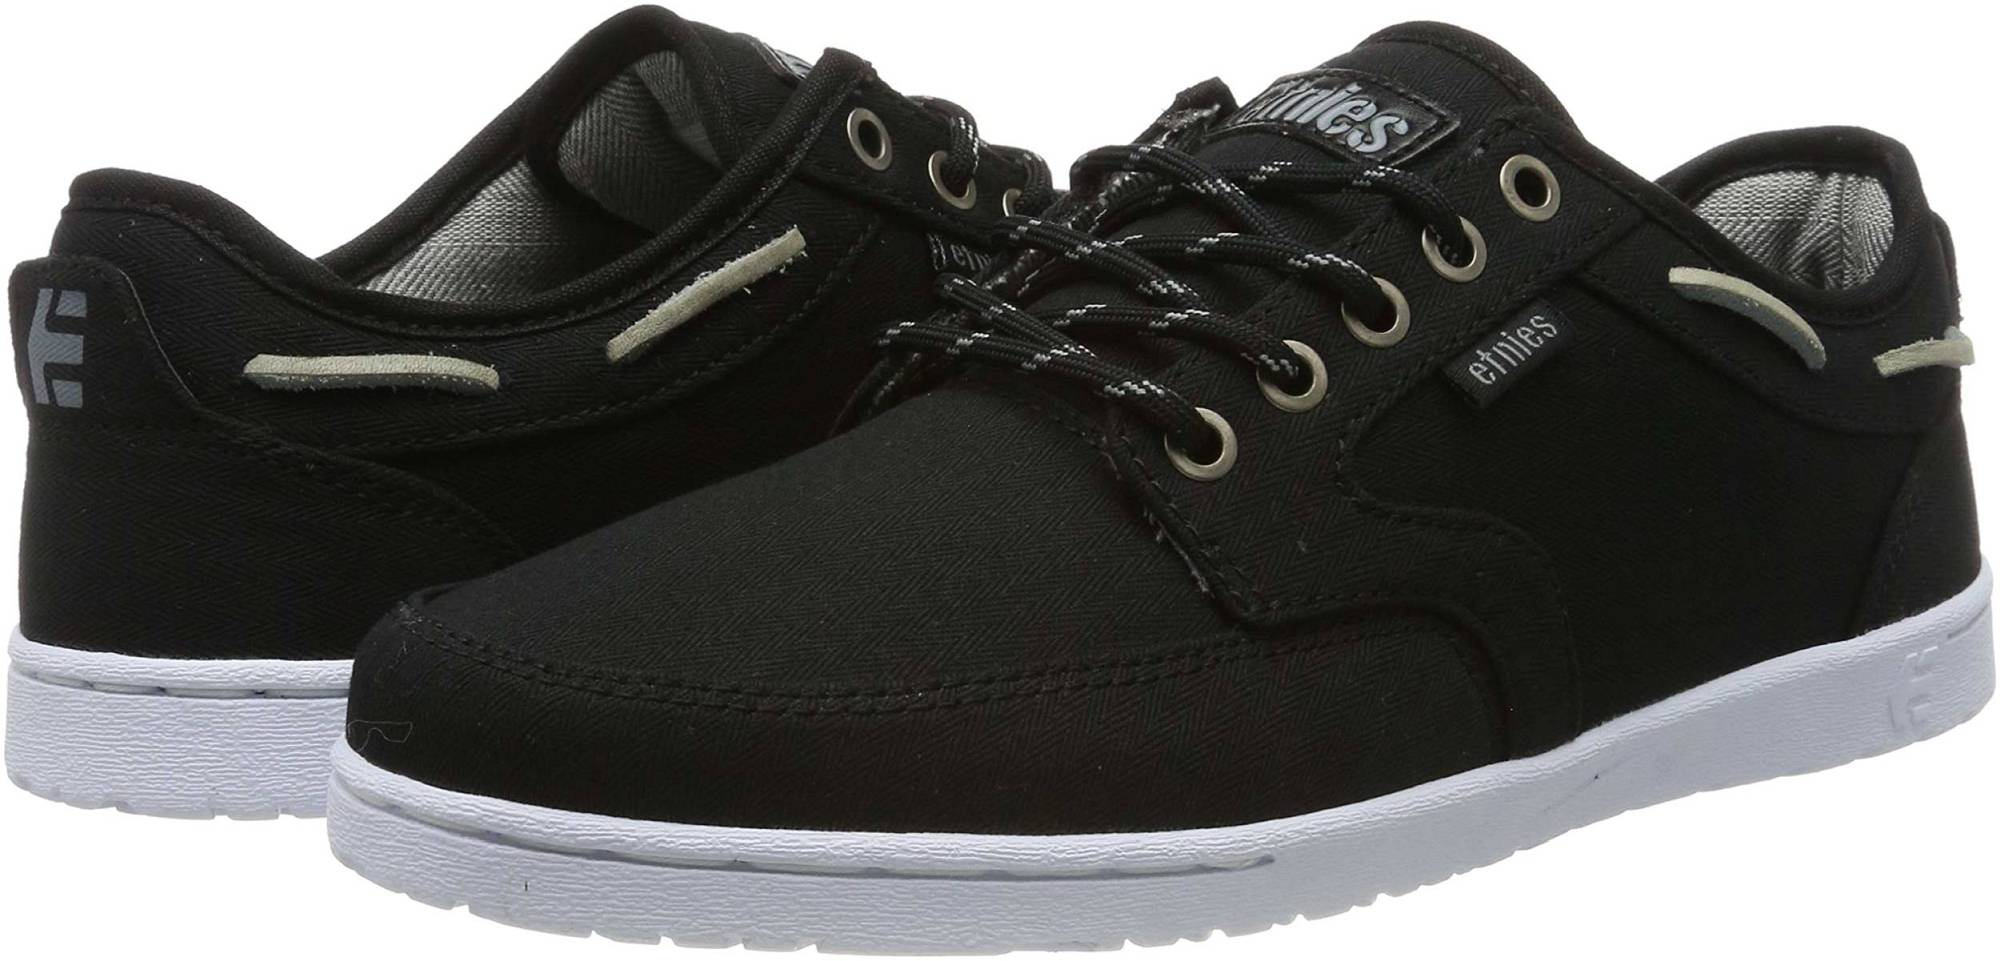 Etnies Dory – Shoes Reviews & Reasons To Buy